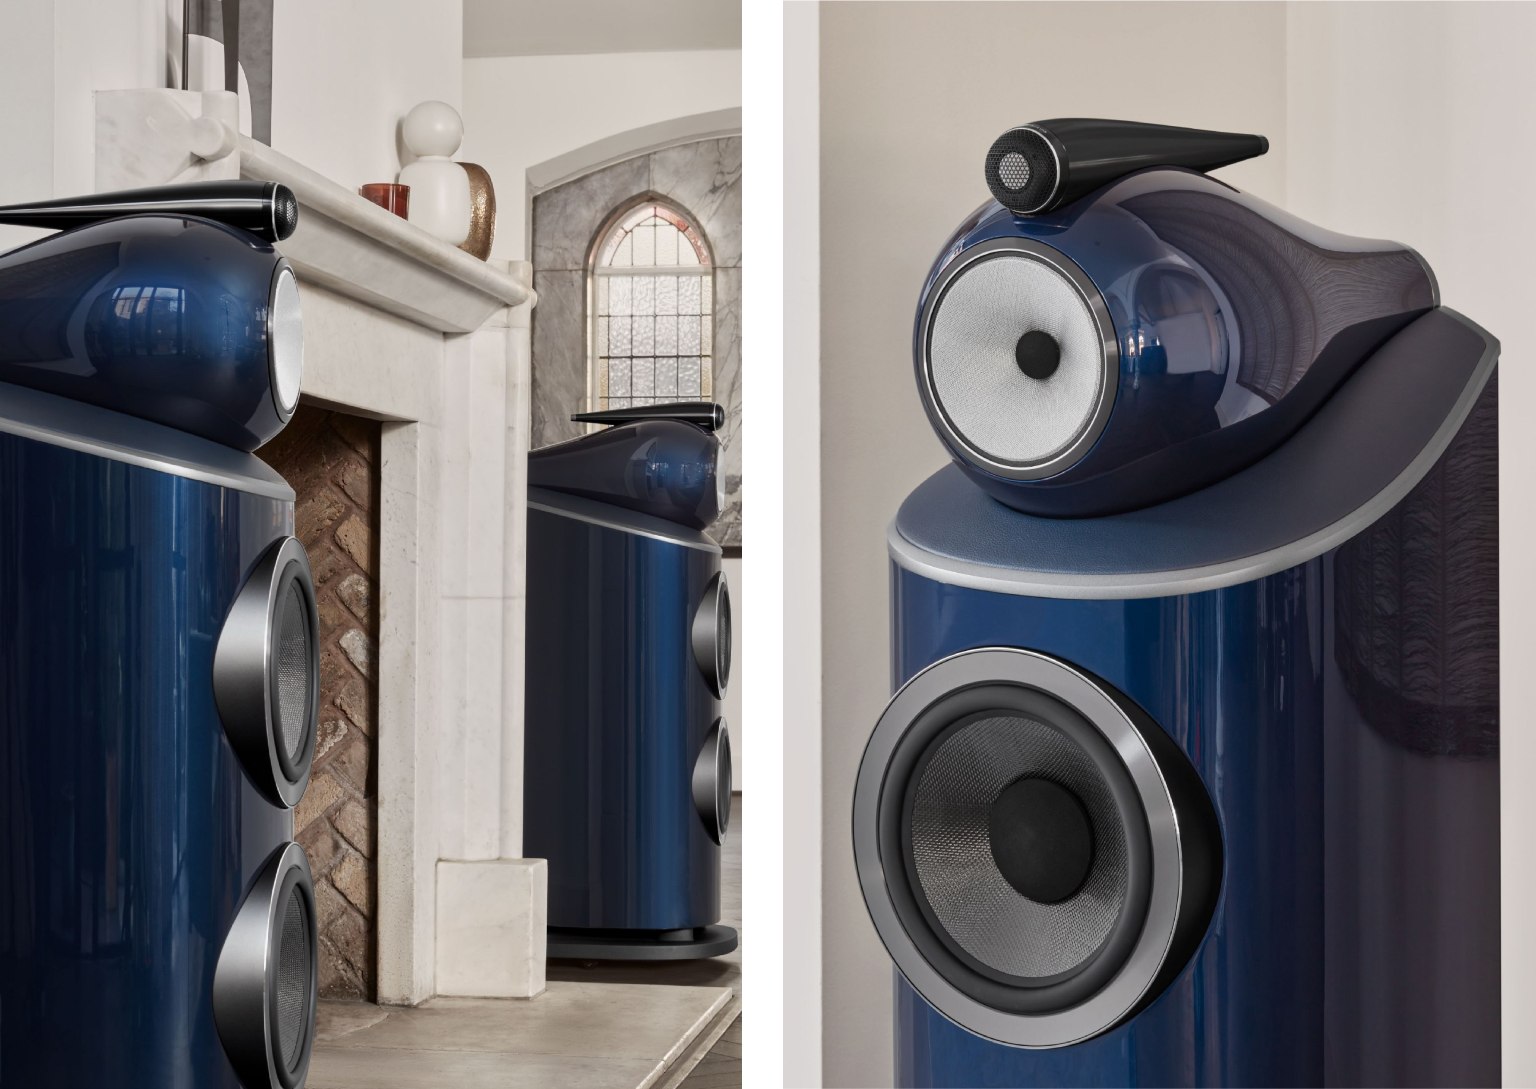 Bowers & Wilkins - The Sound Organisation